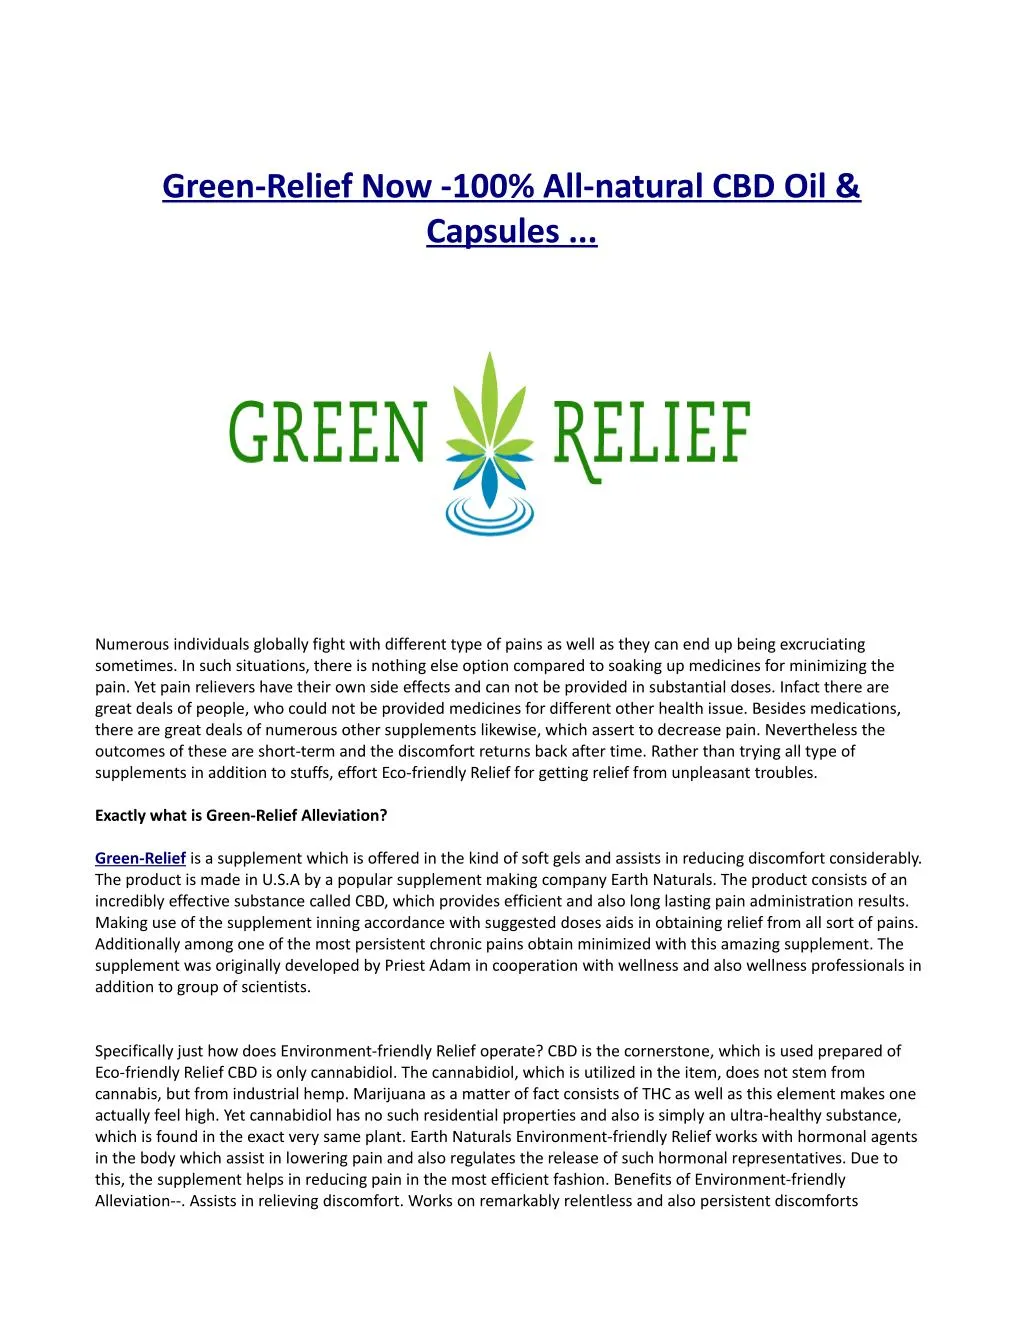 green relief now 100 all natural cbd oil capsules